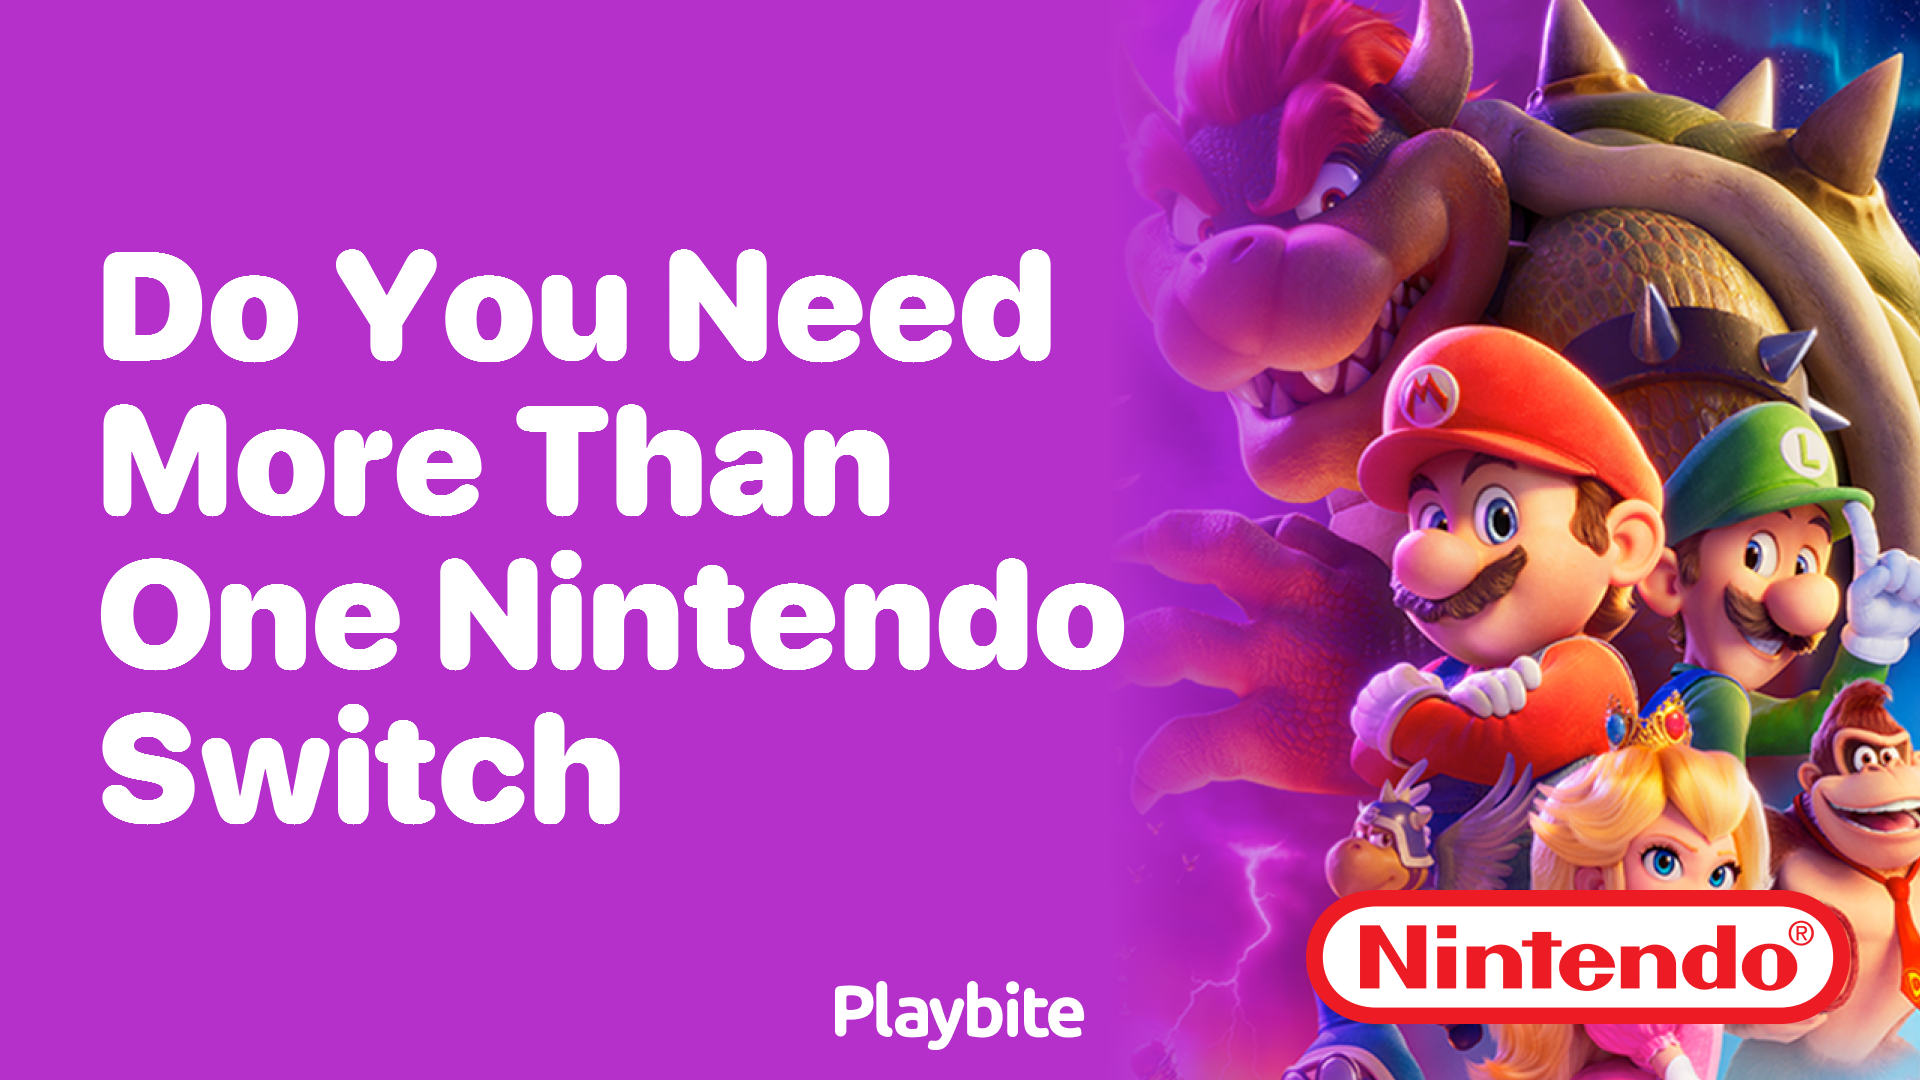 Do You Need More Than One Nintendo Switch?